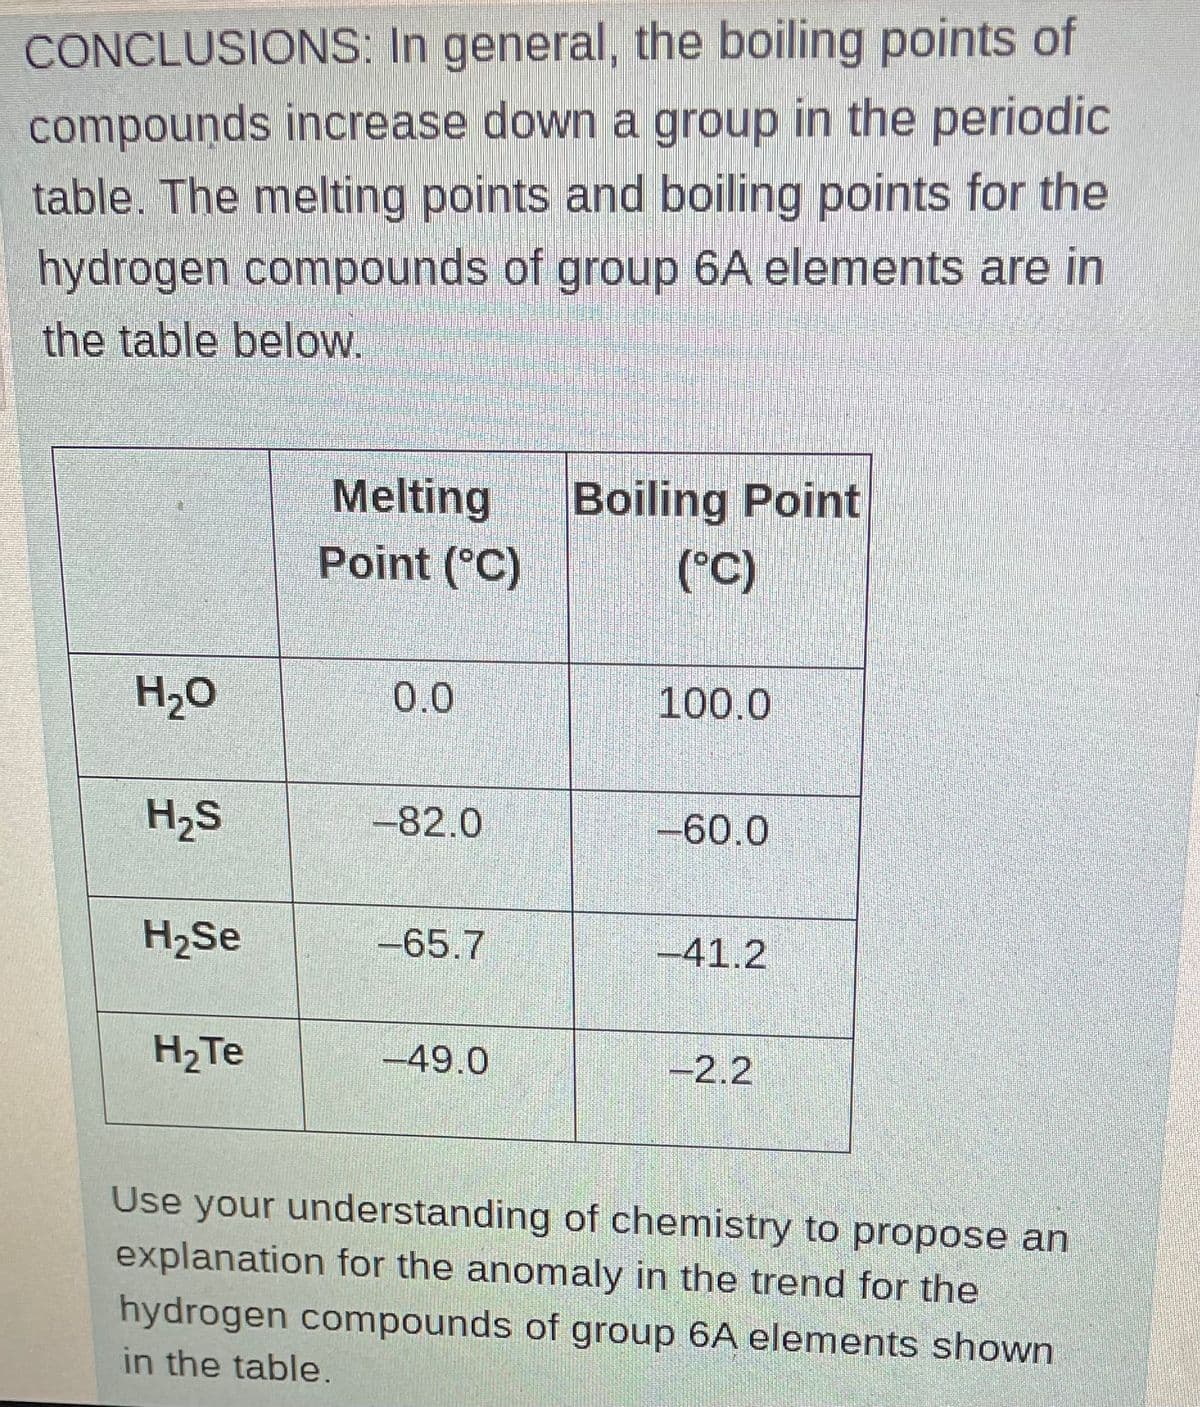 CONCLUSIONS: In general, the boiling points of
compounds increase down a group in the periodic
table. The melting points and boiling points for the
hydrogen compounds of group 6A elements are in
the table below.
Melting
Point (°C)
Boiling Point
(°C)
H₂O
0.0
100.0
H₂S
-82.0
-60.0
H₂Se
-65.7
-41.2
H₂Te
-49.0
-2.2
Use your understanding of chemistry to propose an
explanation for the anomaly in the trend for the
hydrogen compounds of group 6A elements shown
in the table.